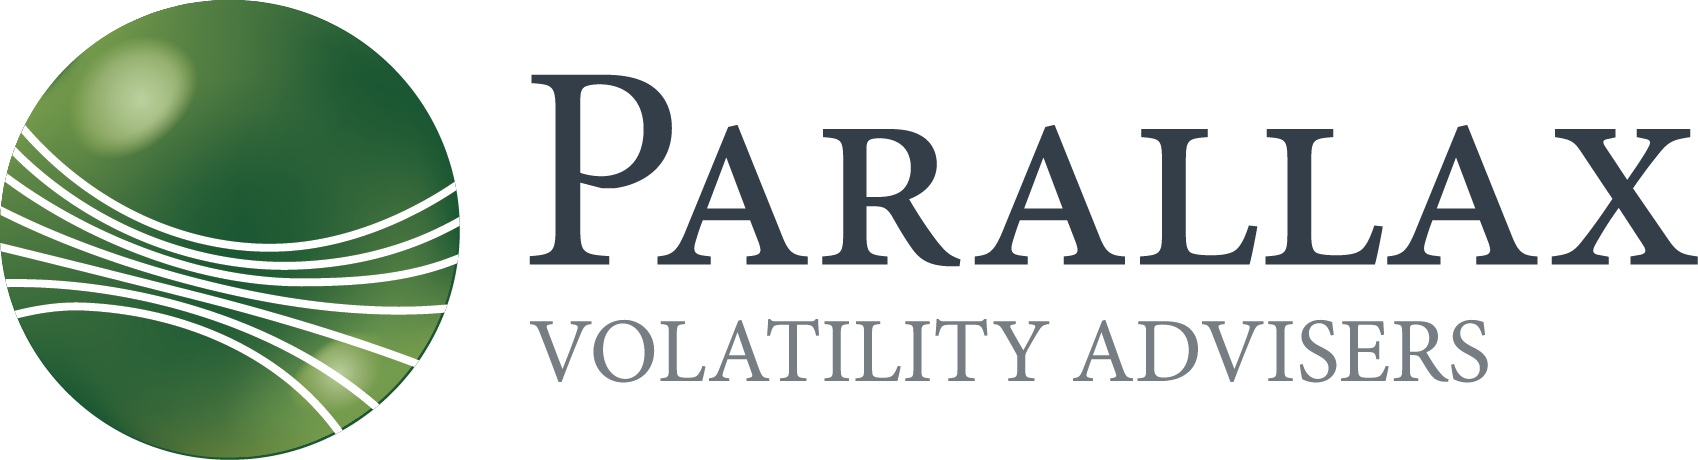 parallax volatility advisers tail hedging